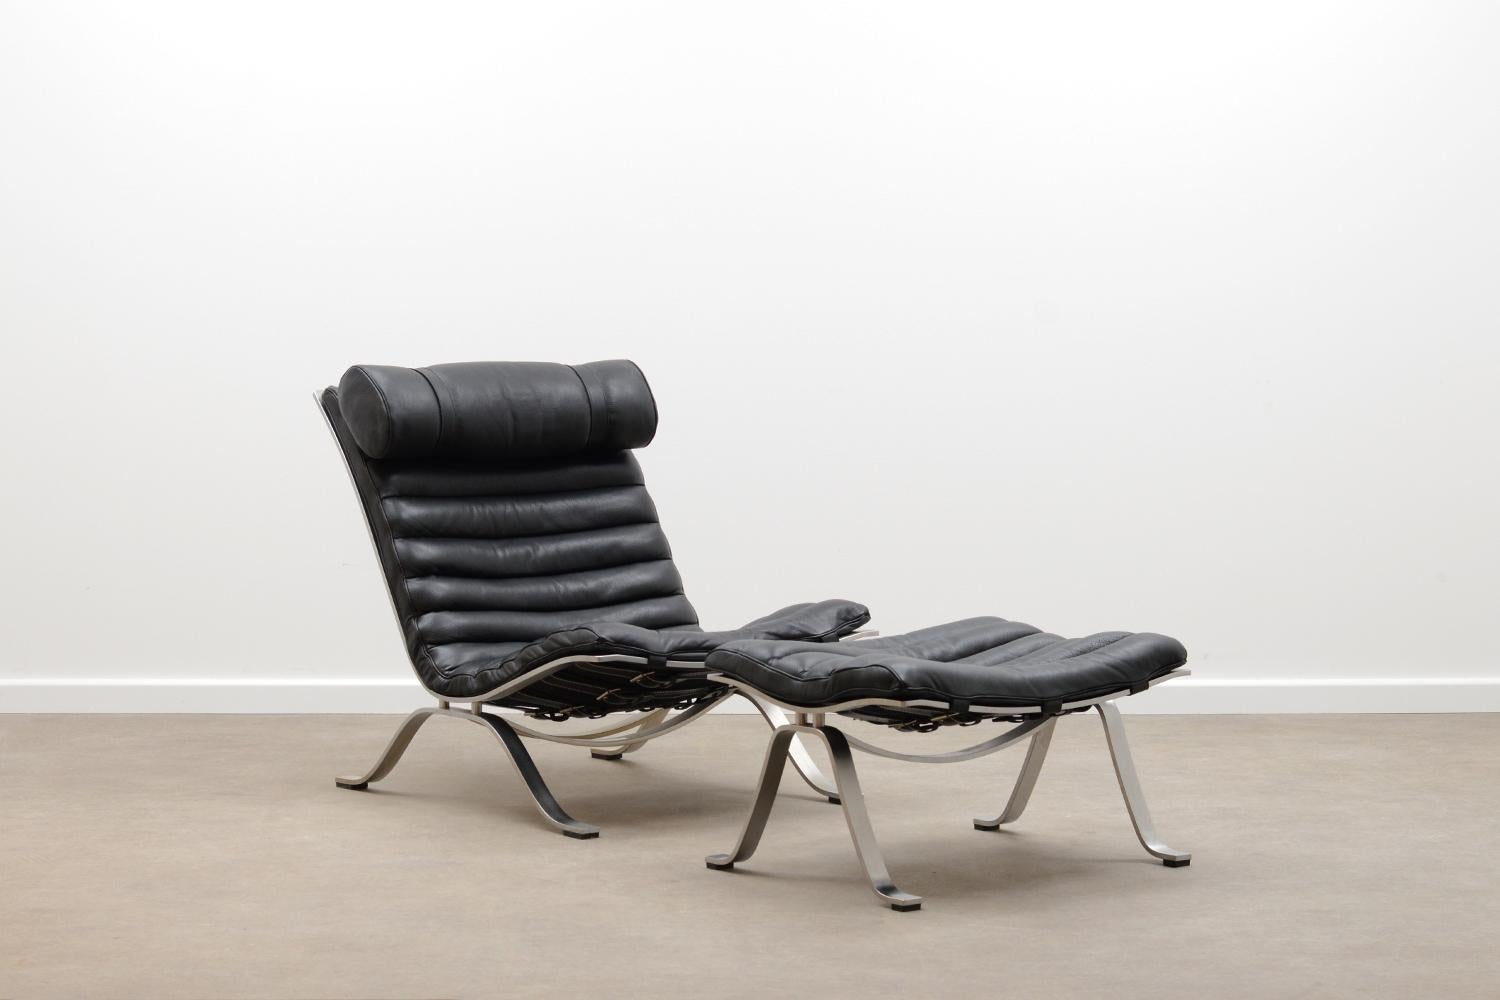 Black “Ari” chair and ottoman by Arne Norell for Norell möbel AB. This is the price winning flagship model of Arne Norell. Brushed steel frame, Leather belts and buffalo leather seat and cushion. The cushion can be removed or adjusted in height with